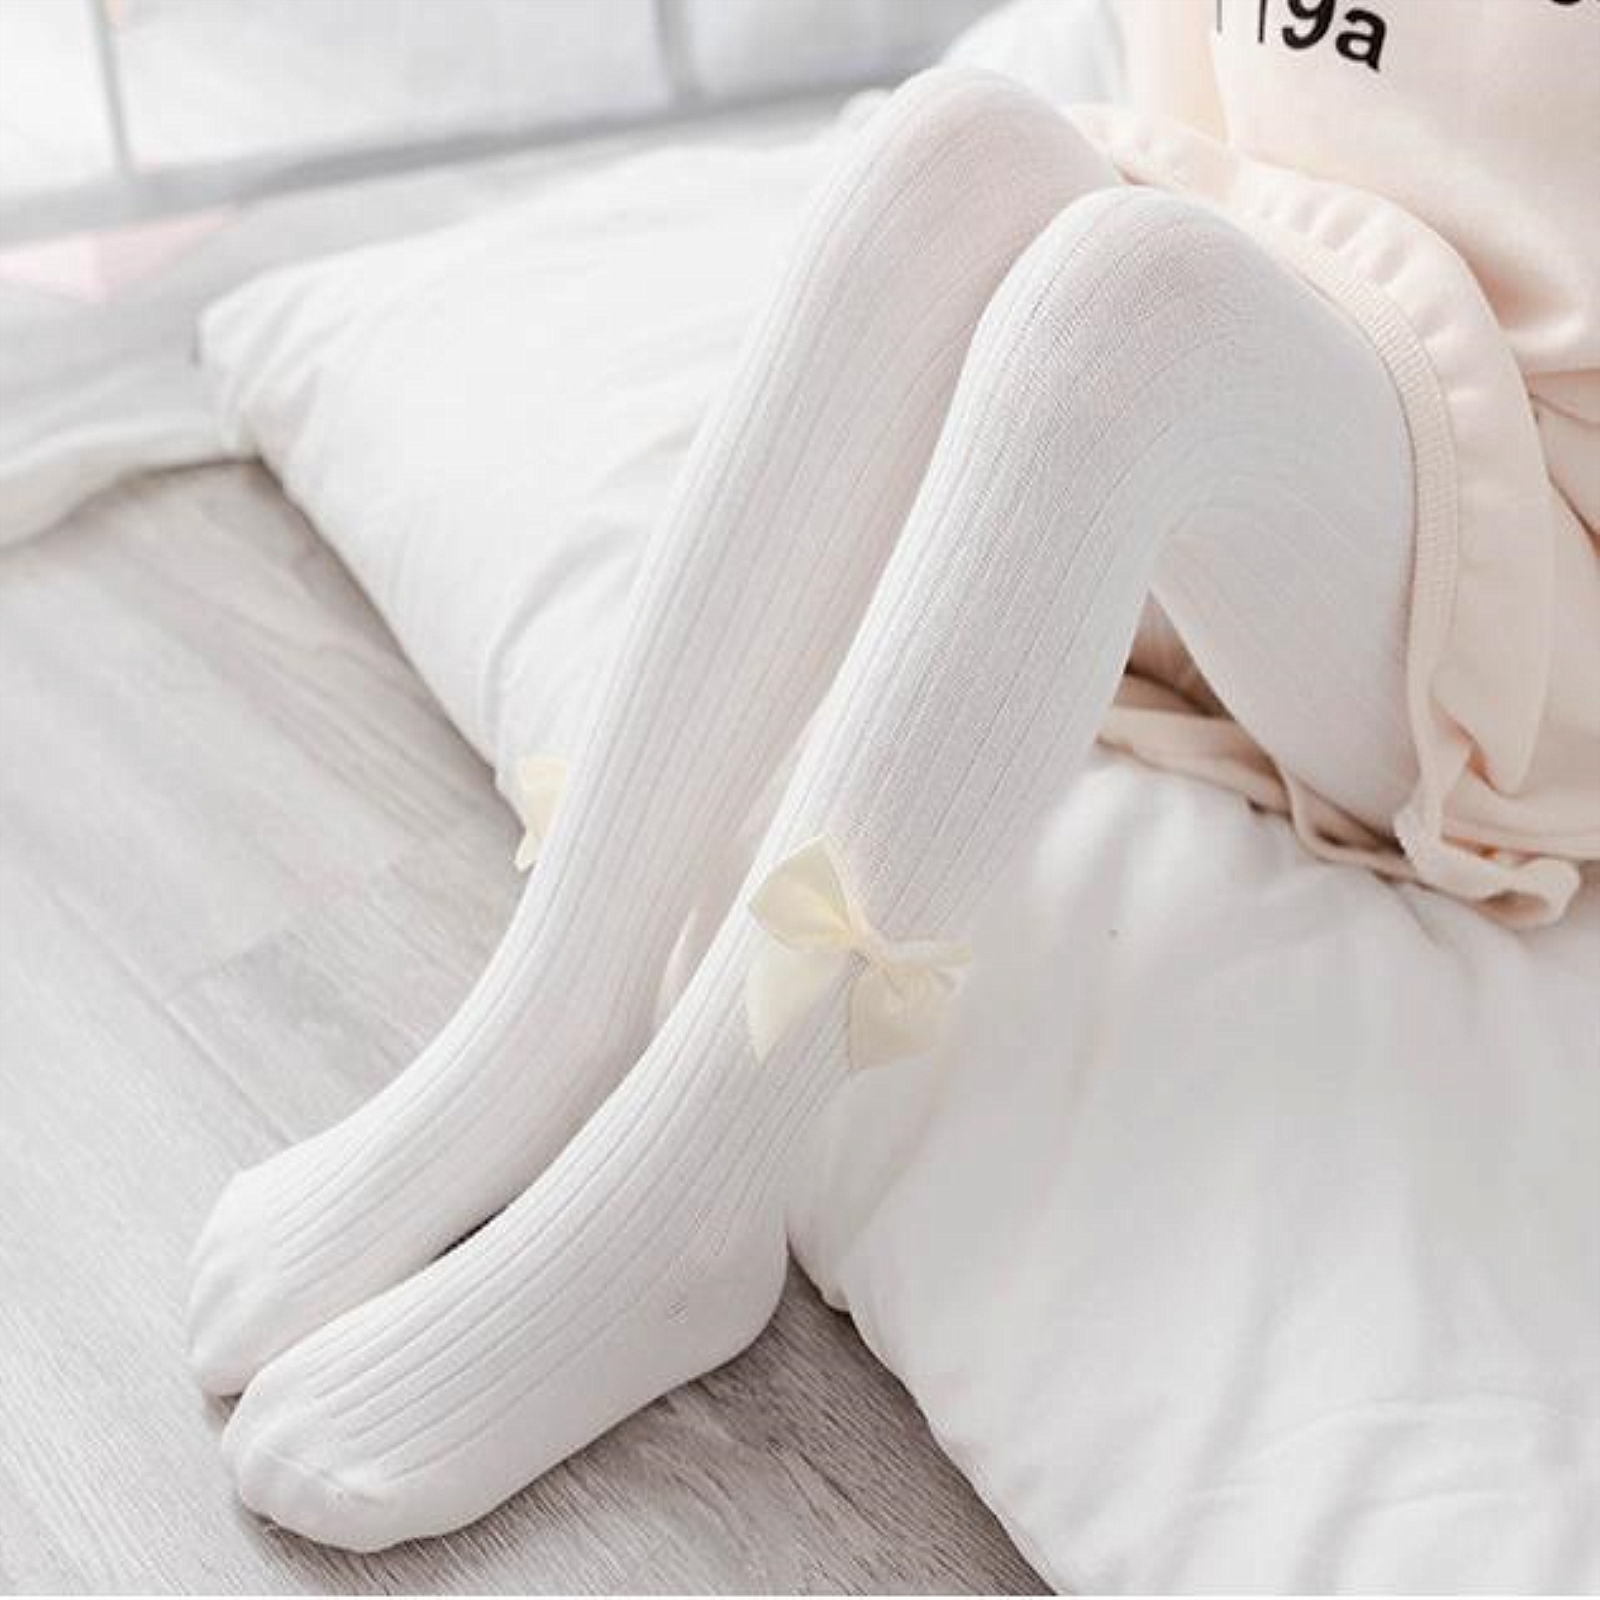 Girls Tights Seamless Thick Cotton Cable Knit Leggings Stockings Toddler  Pantyhose Age 1-12y 